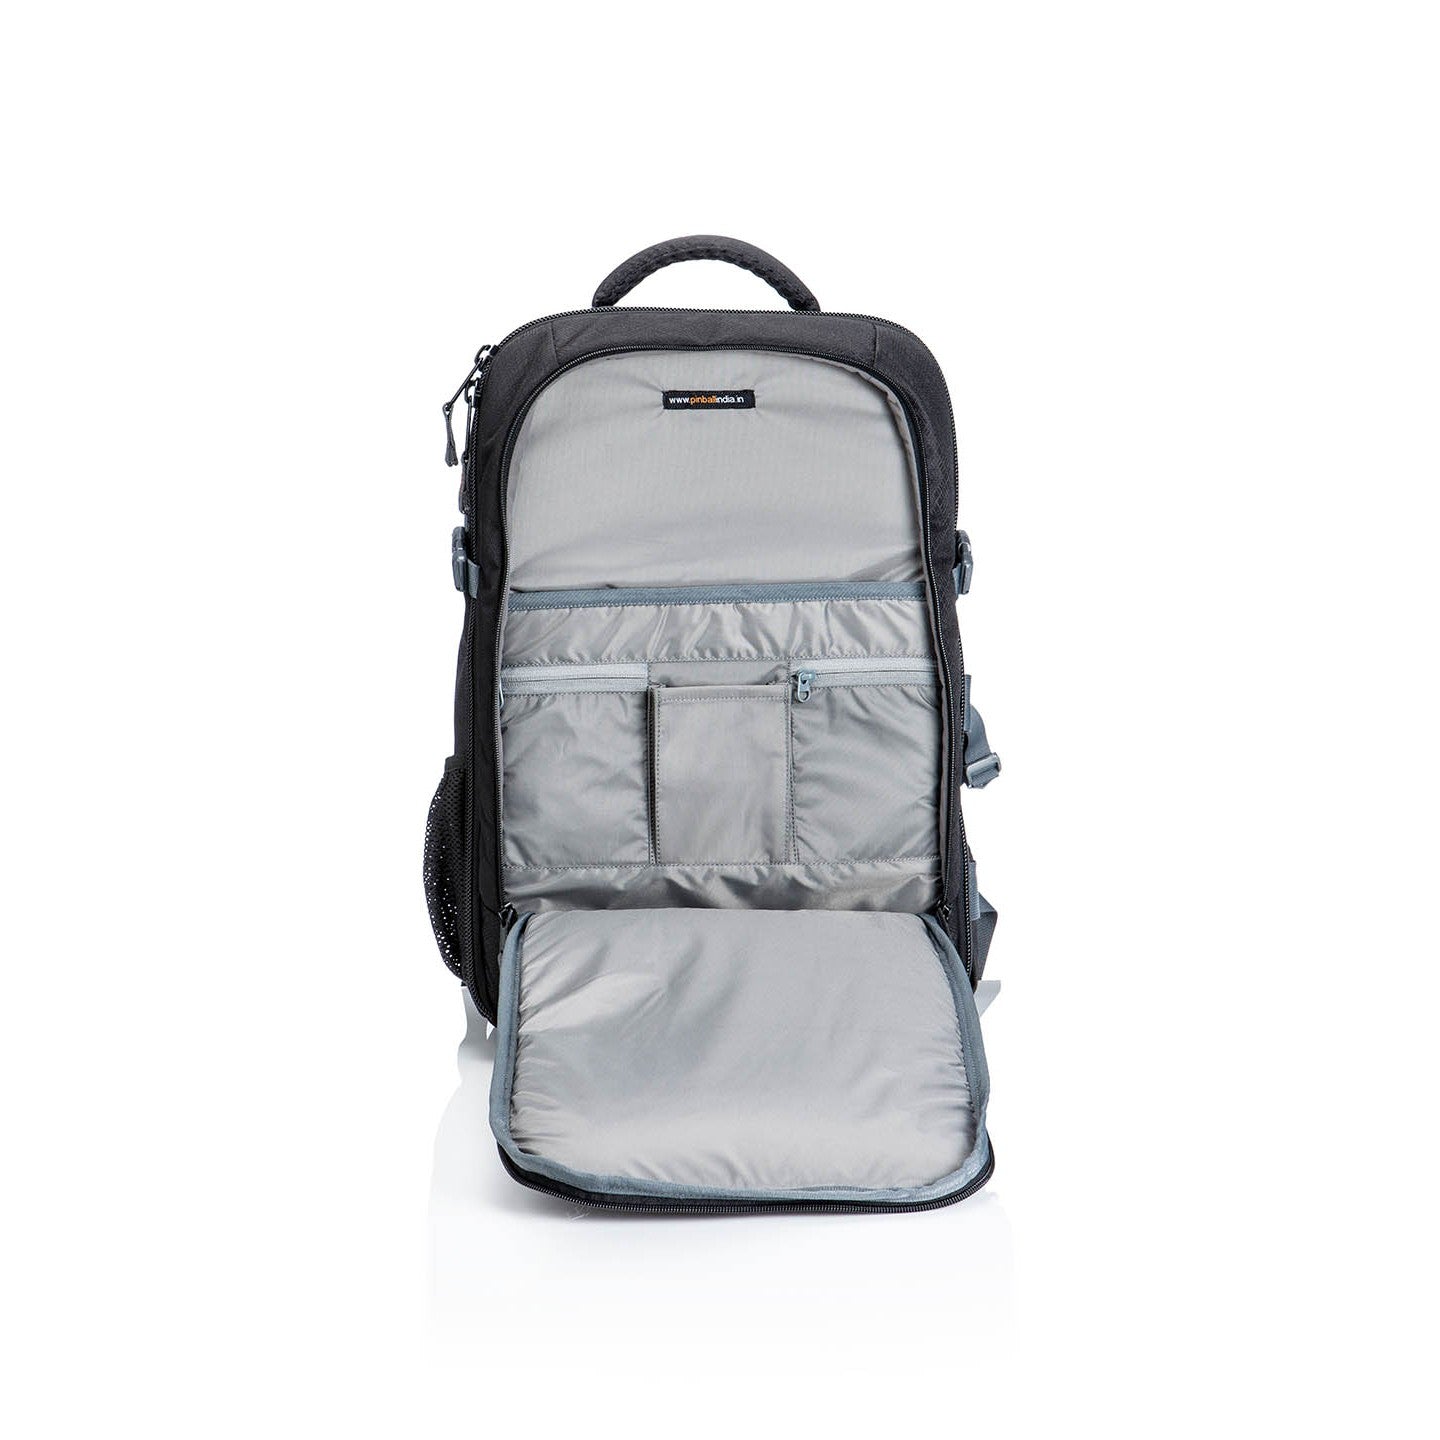 "Image: Front view of the P41 Tribute DSLR camera bag with the front flap open, providing a clear view of the interior compartments and customizable dividers. The open flap allows for easy access to your camera and accessories, making it convenient to grab your gear and start shooting. Stay organized and efficient with the P41 Tribute."